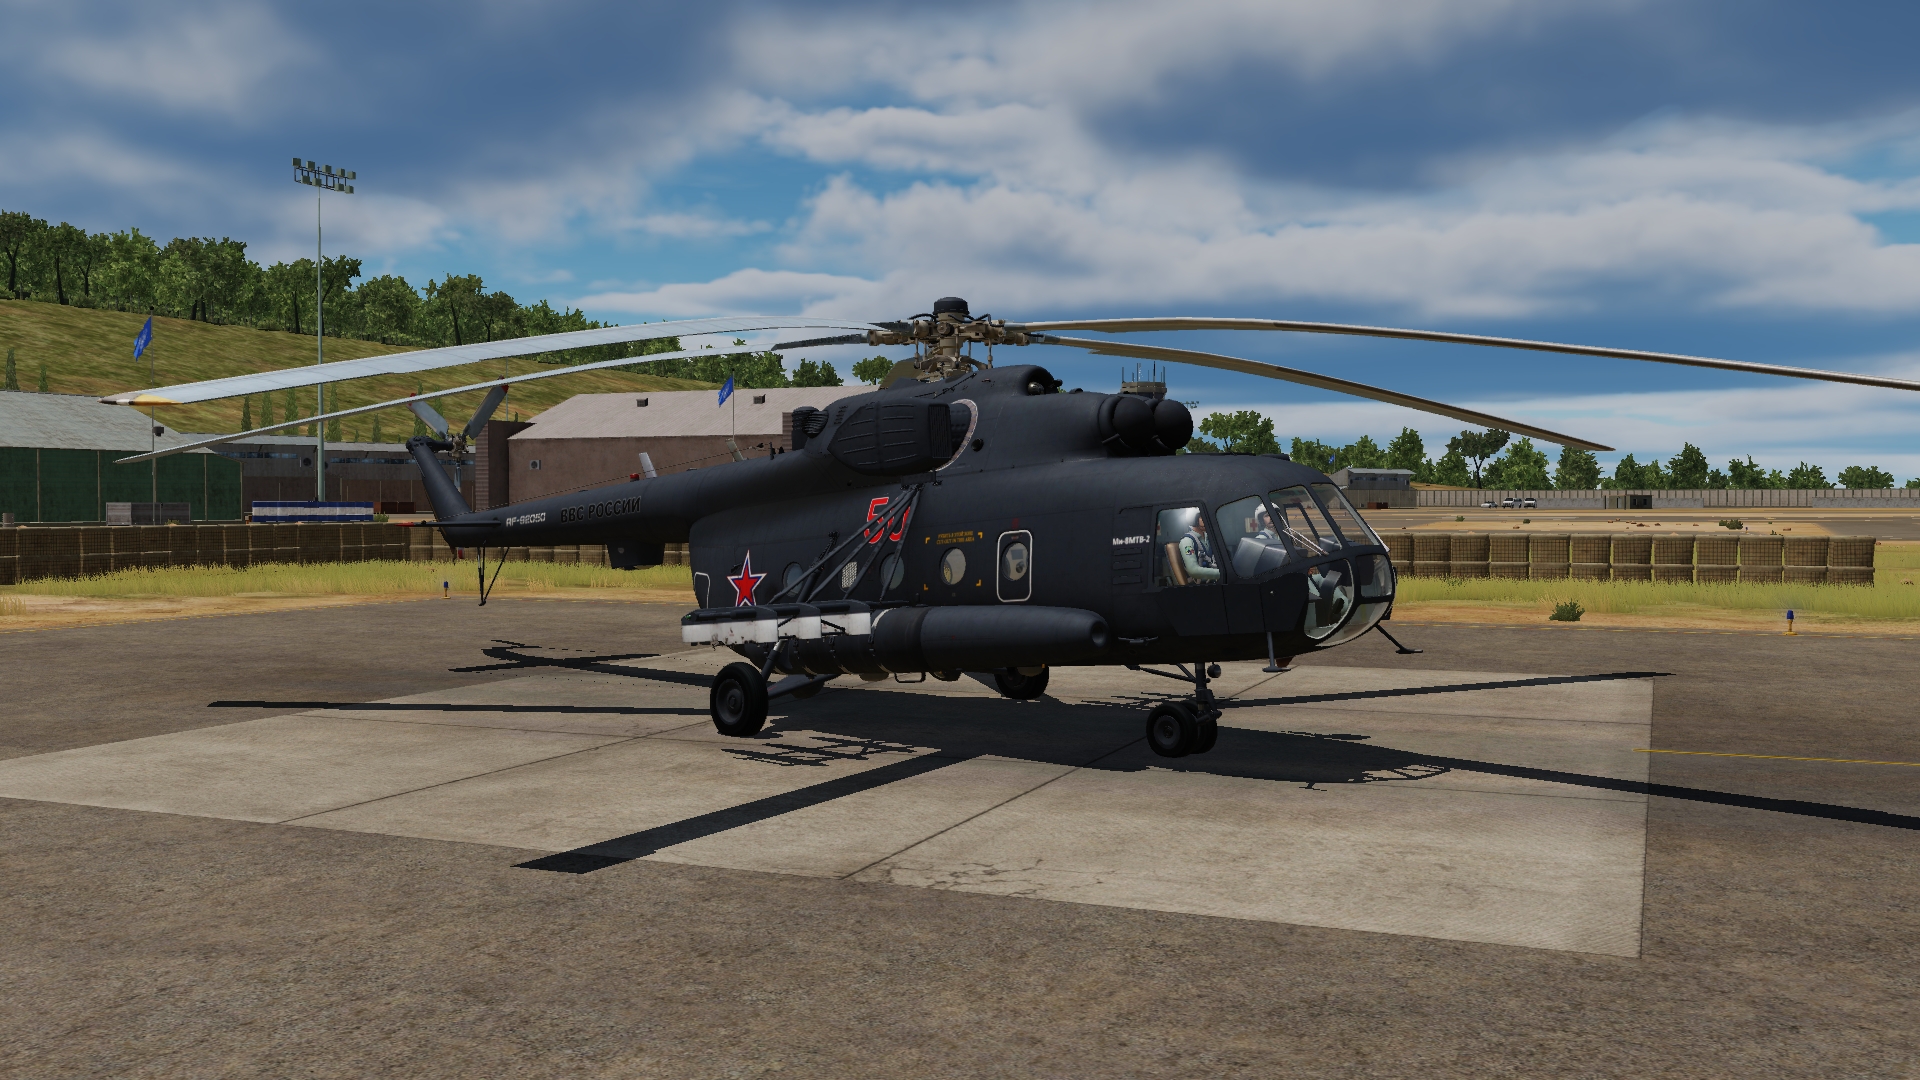 General 1920x1080 Digital Combat Simulator video games aircraft helicopters Russian Air Force Mil Mi-8 screen shot Mil Helicopters Russian/Soviet aircraft